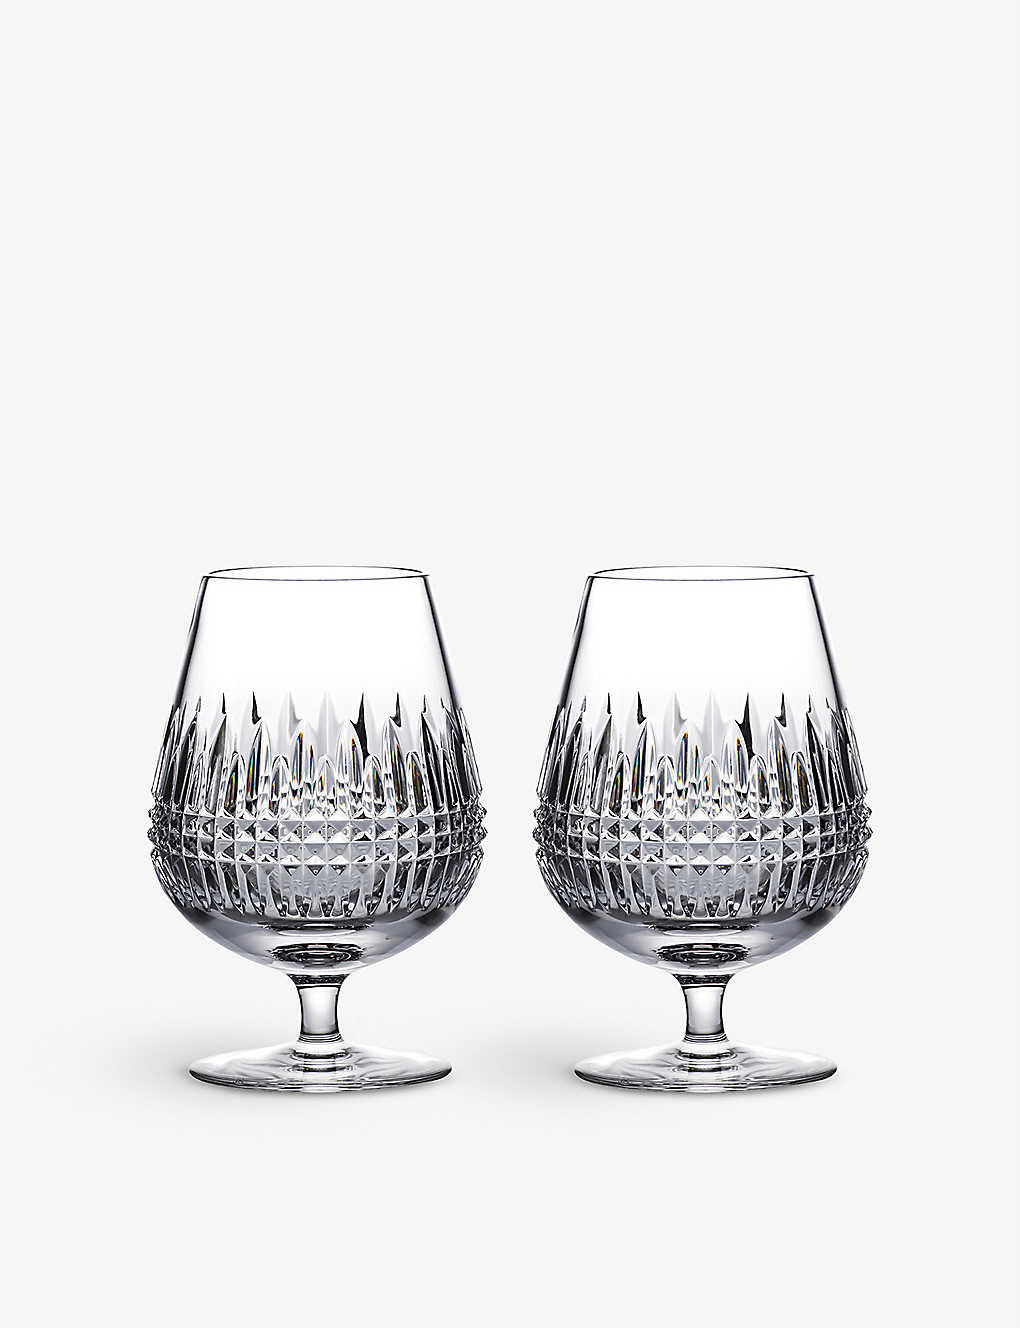 WATERFORD コニッサー リズモア クリスタル ブランデー グラス 2個セット Connoisseur Lismore crystal brandy glasses set of two